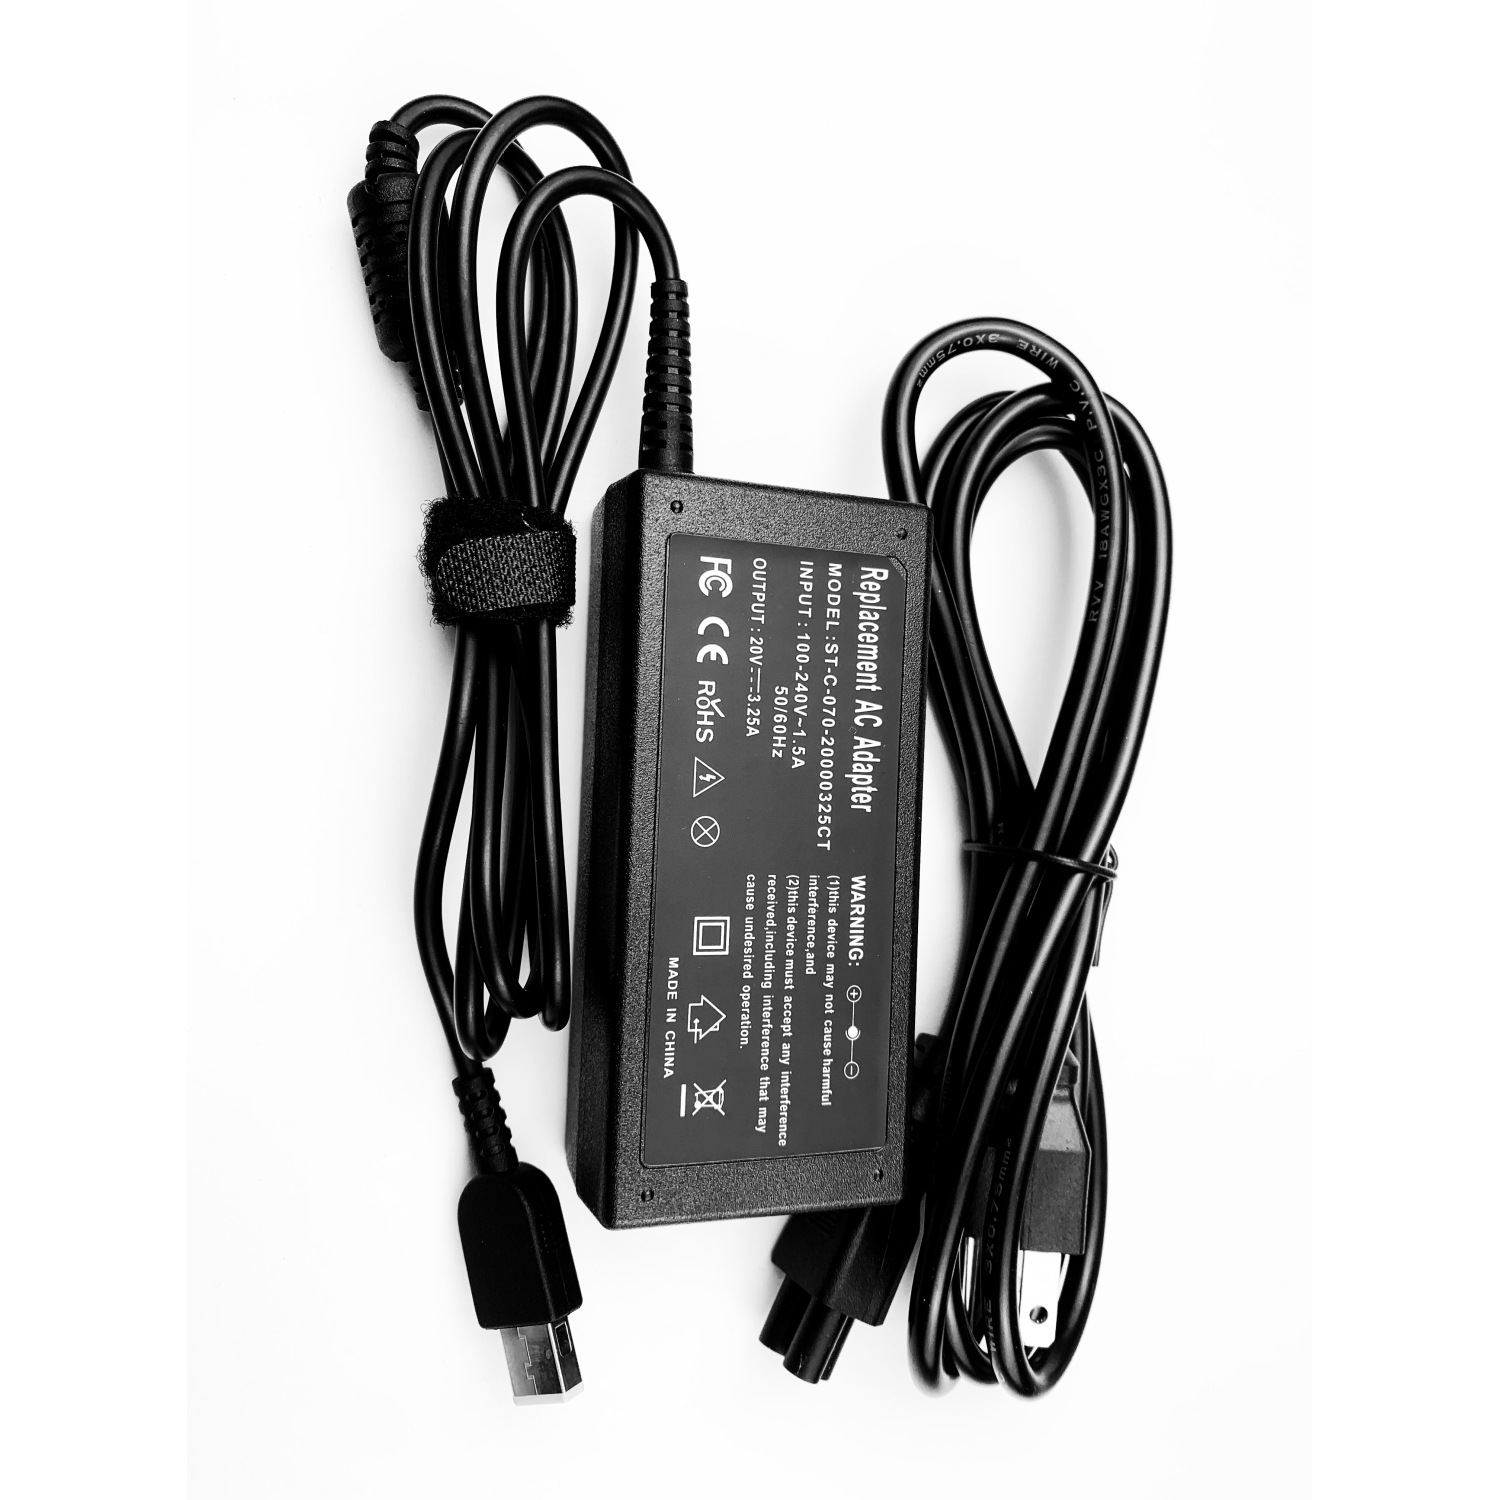 65W AC adapter charger for Lenovo Edge G40-70 G50 G70 Z50